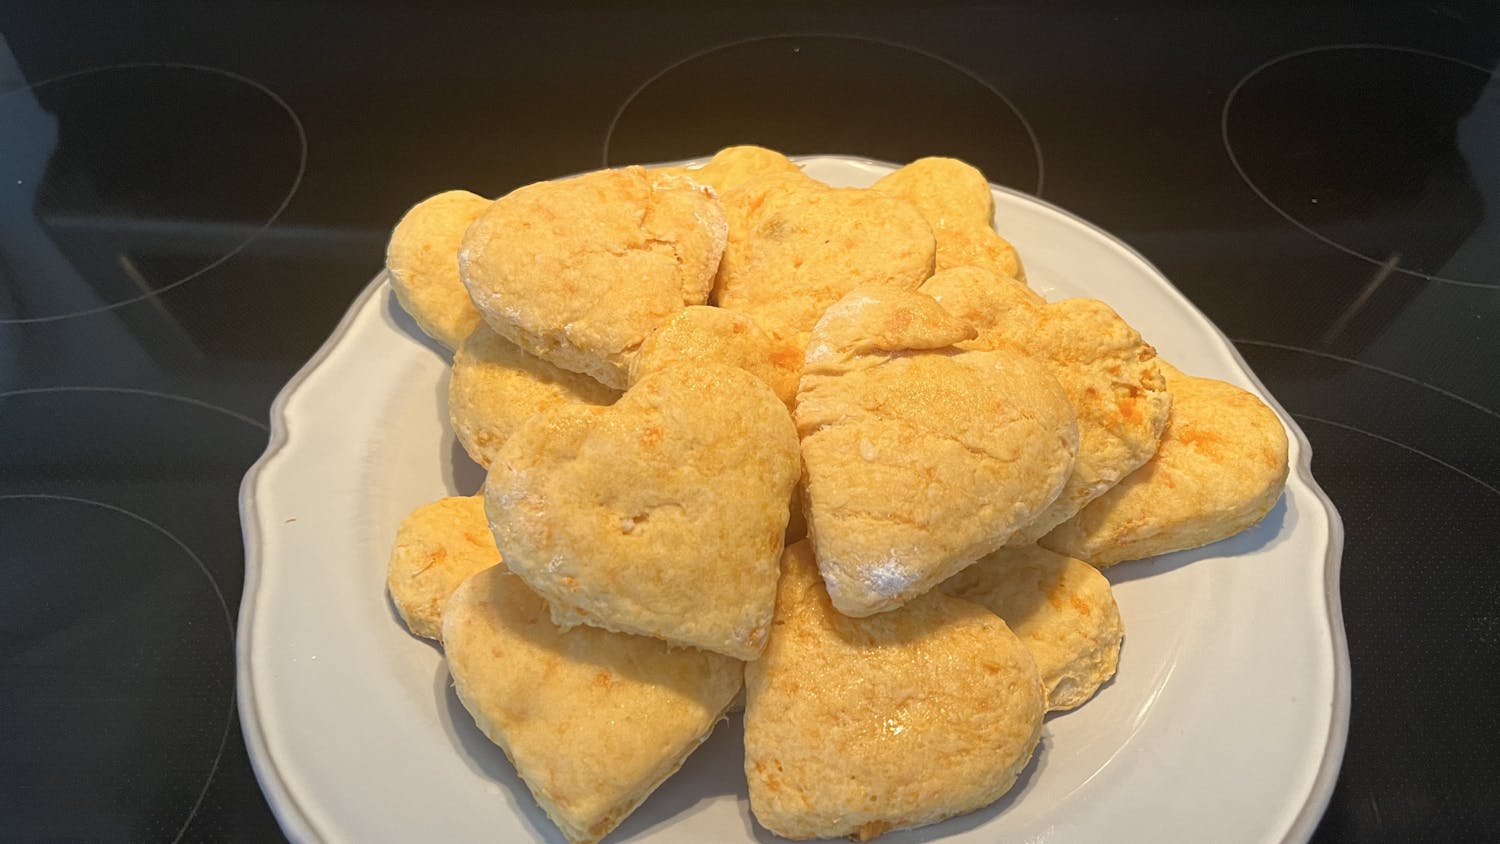 A pile of delicious, heart-shaped sweet potato biscuits sit on a plate on Jan. 29, 2023. This easy-to-make recipe makes for a great Valentine's Day treat.